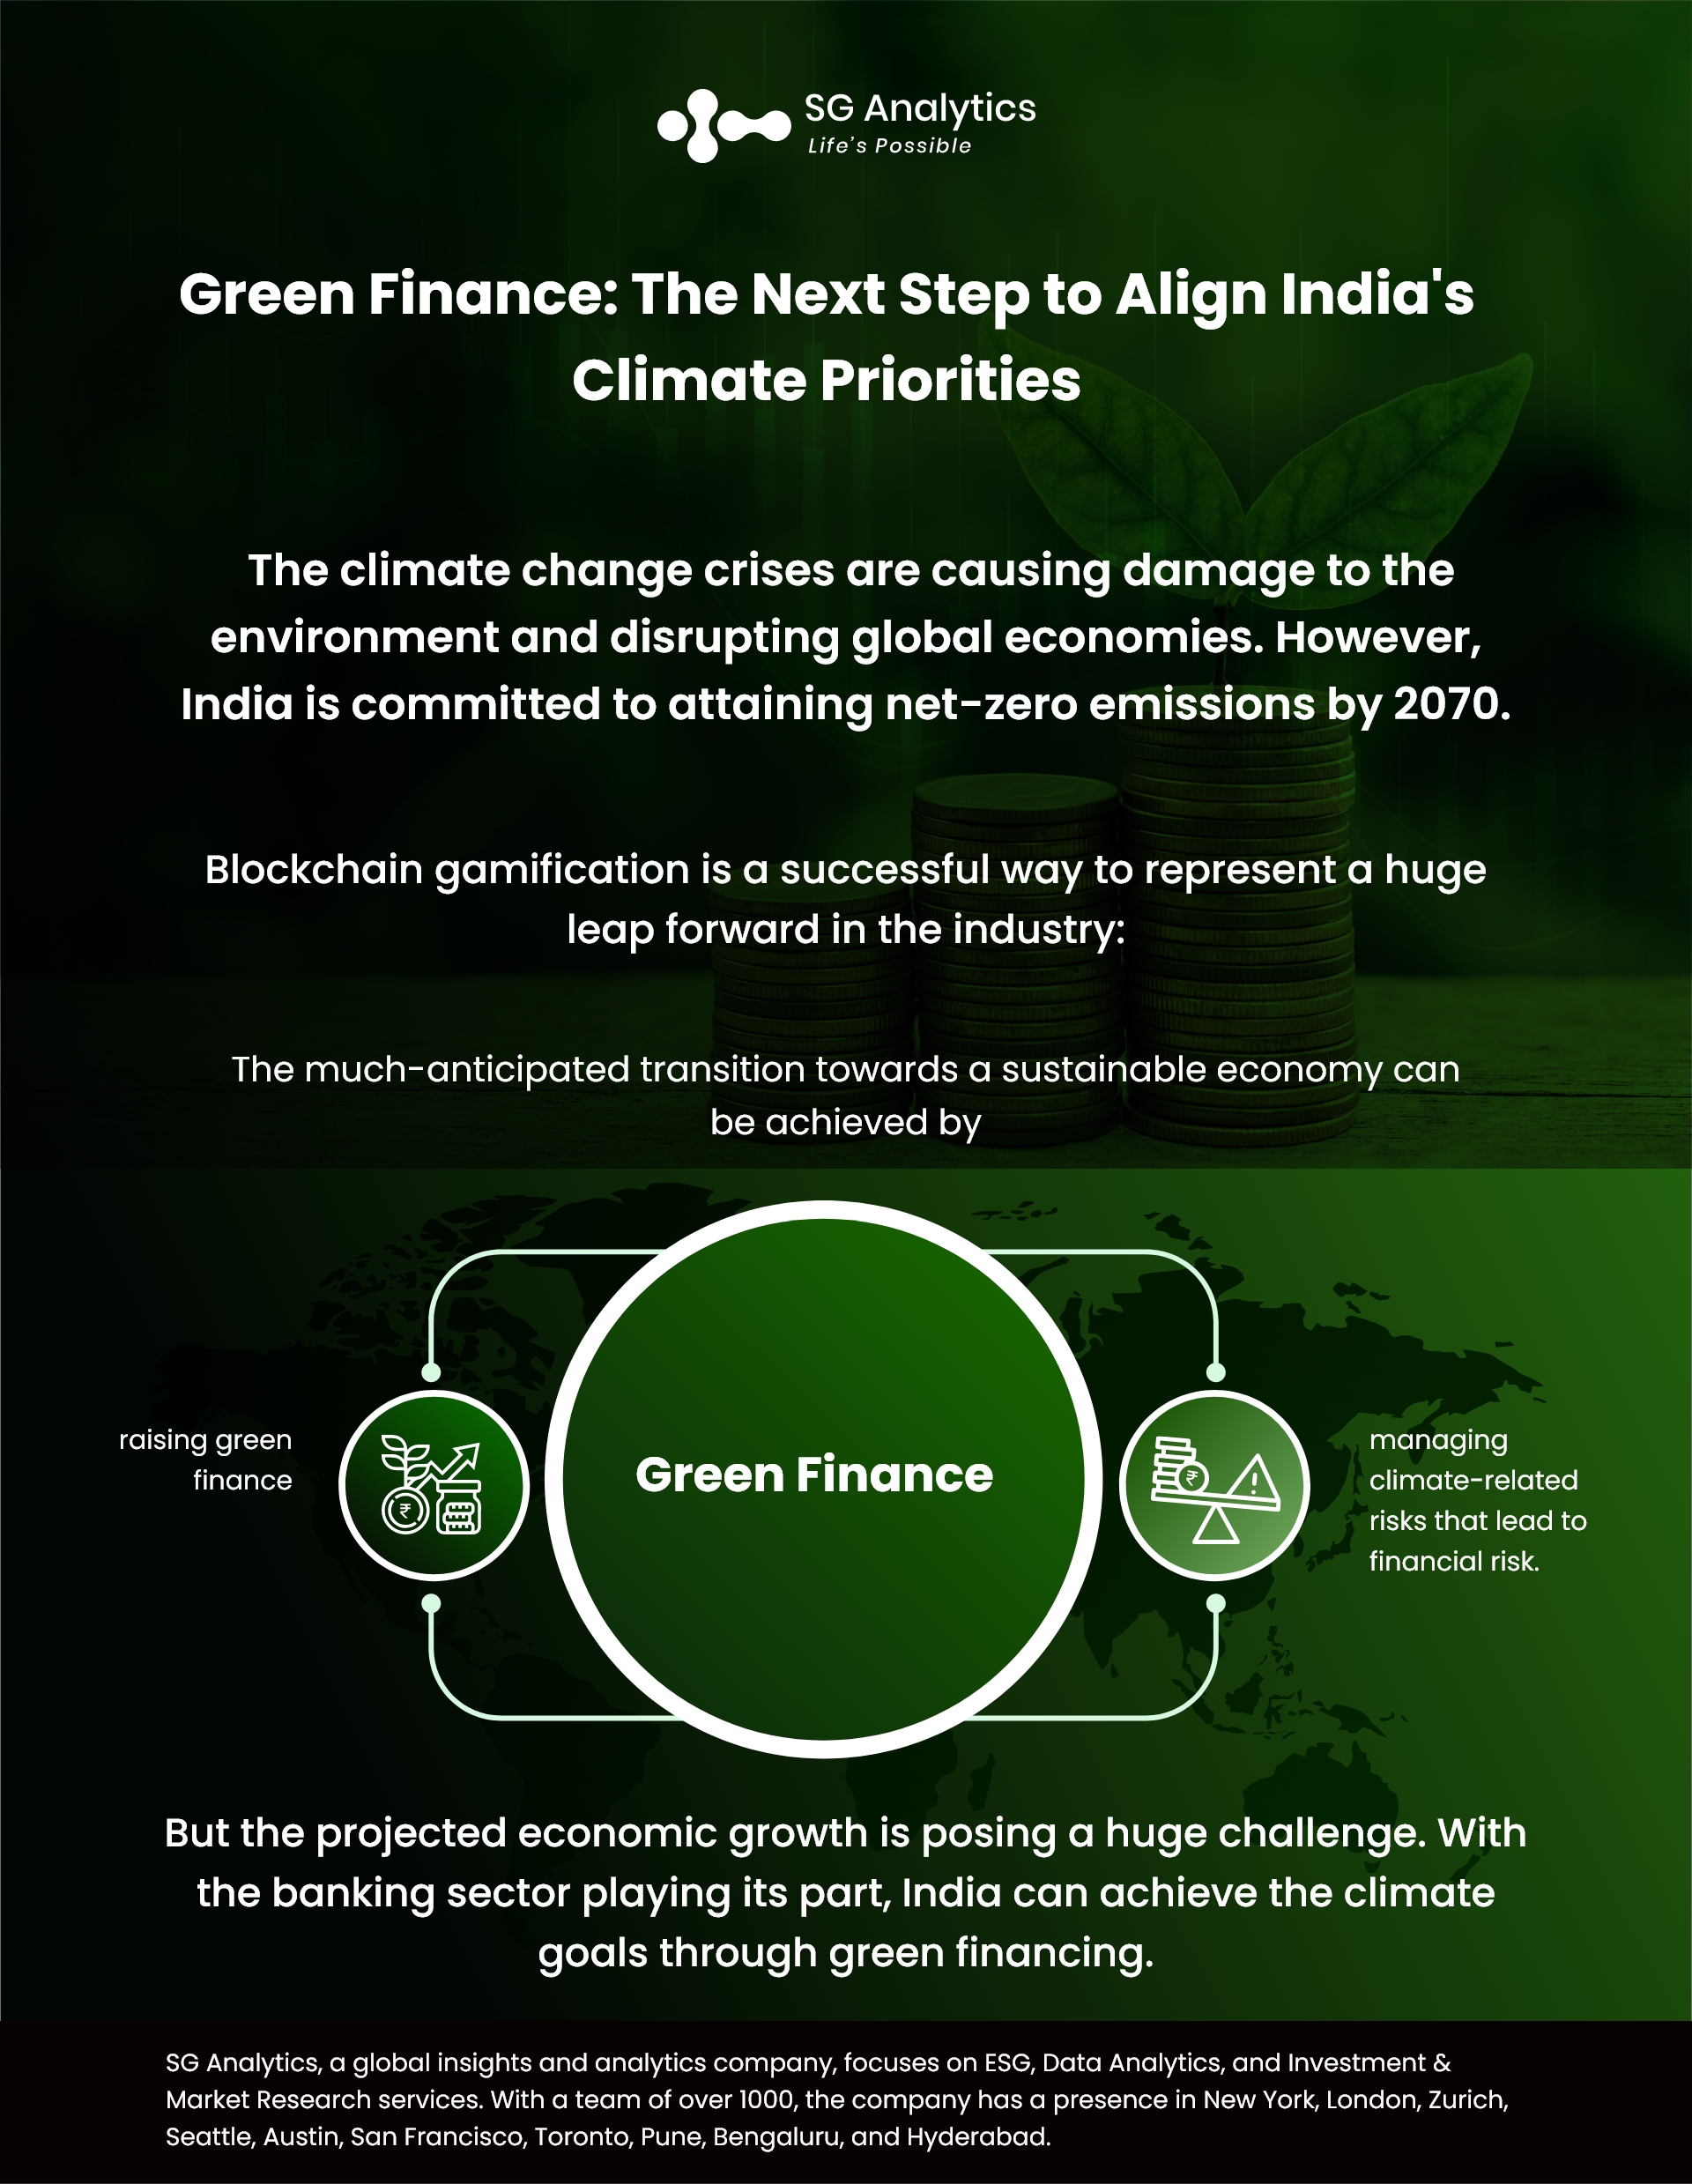 SG Analytics - Green Finance - The Next Step to Align India's Climate Priorities